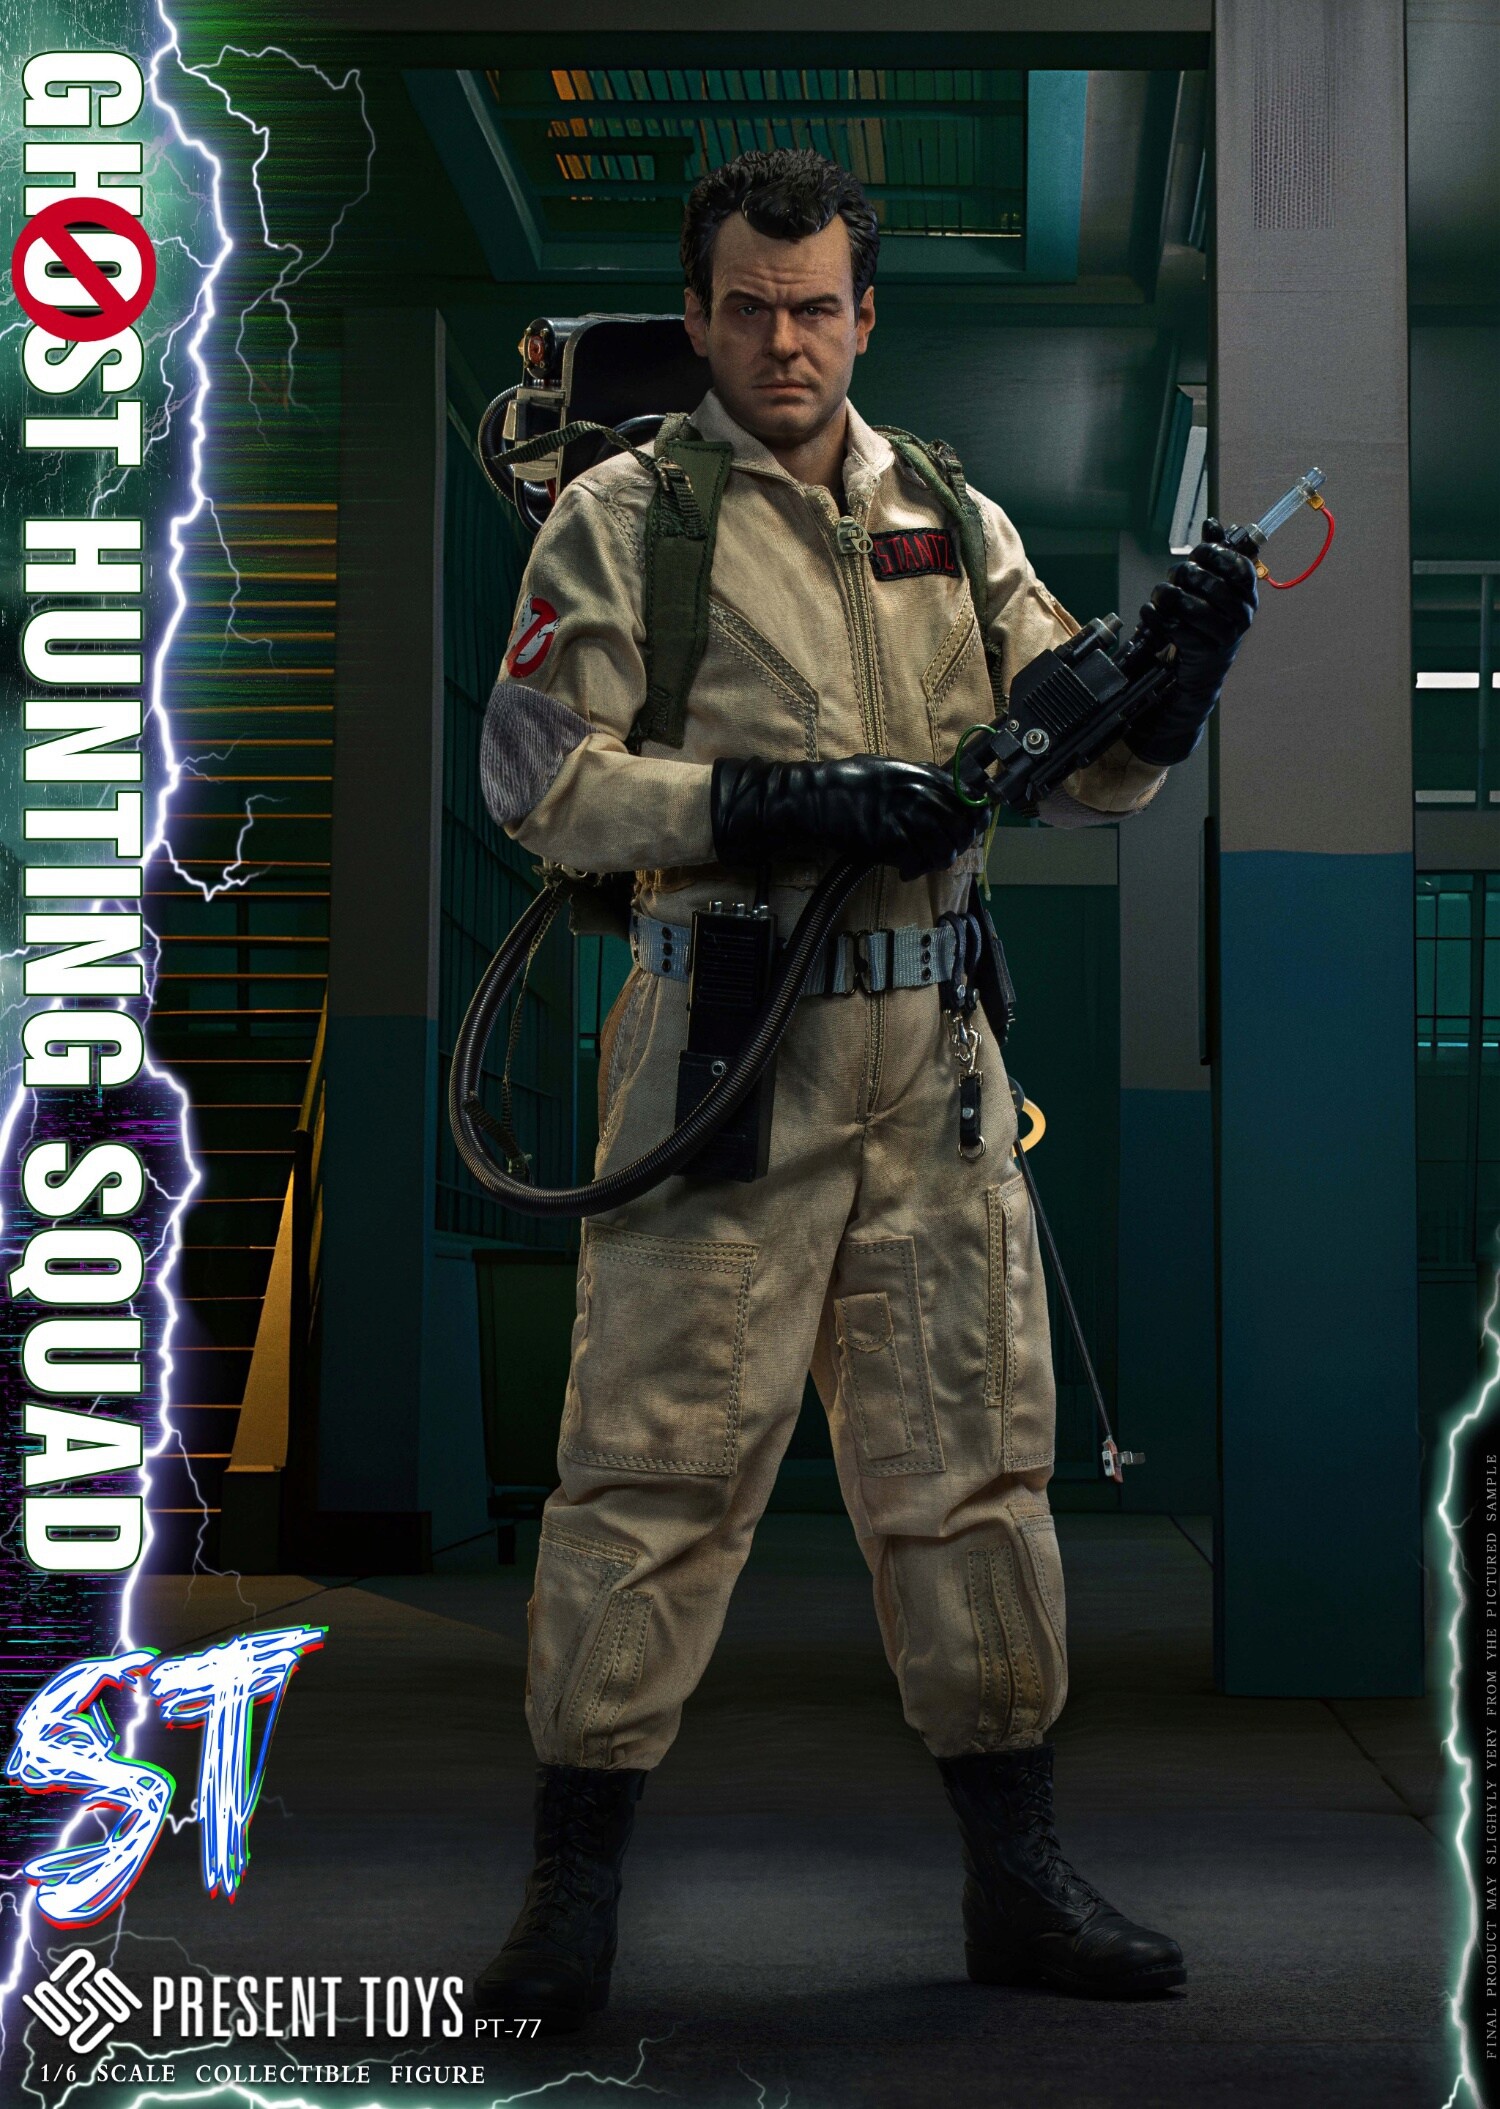 Ghostbusters - NEW PRODUCT: PRESENT TOYS - Ghostbusters-ST Agent & SP Agent Collection #PT-sp77/PT-sp78 02184